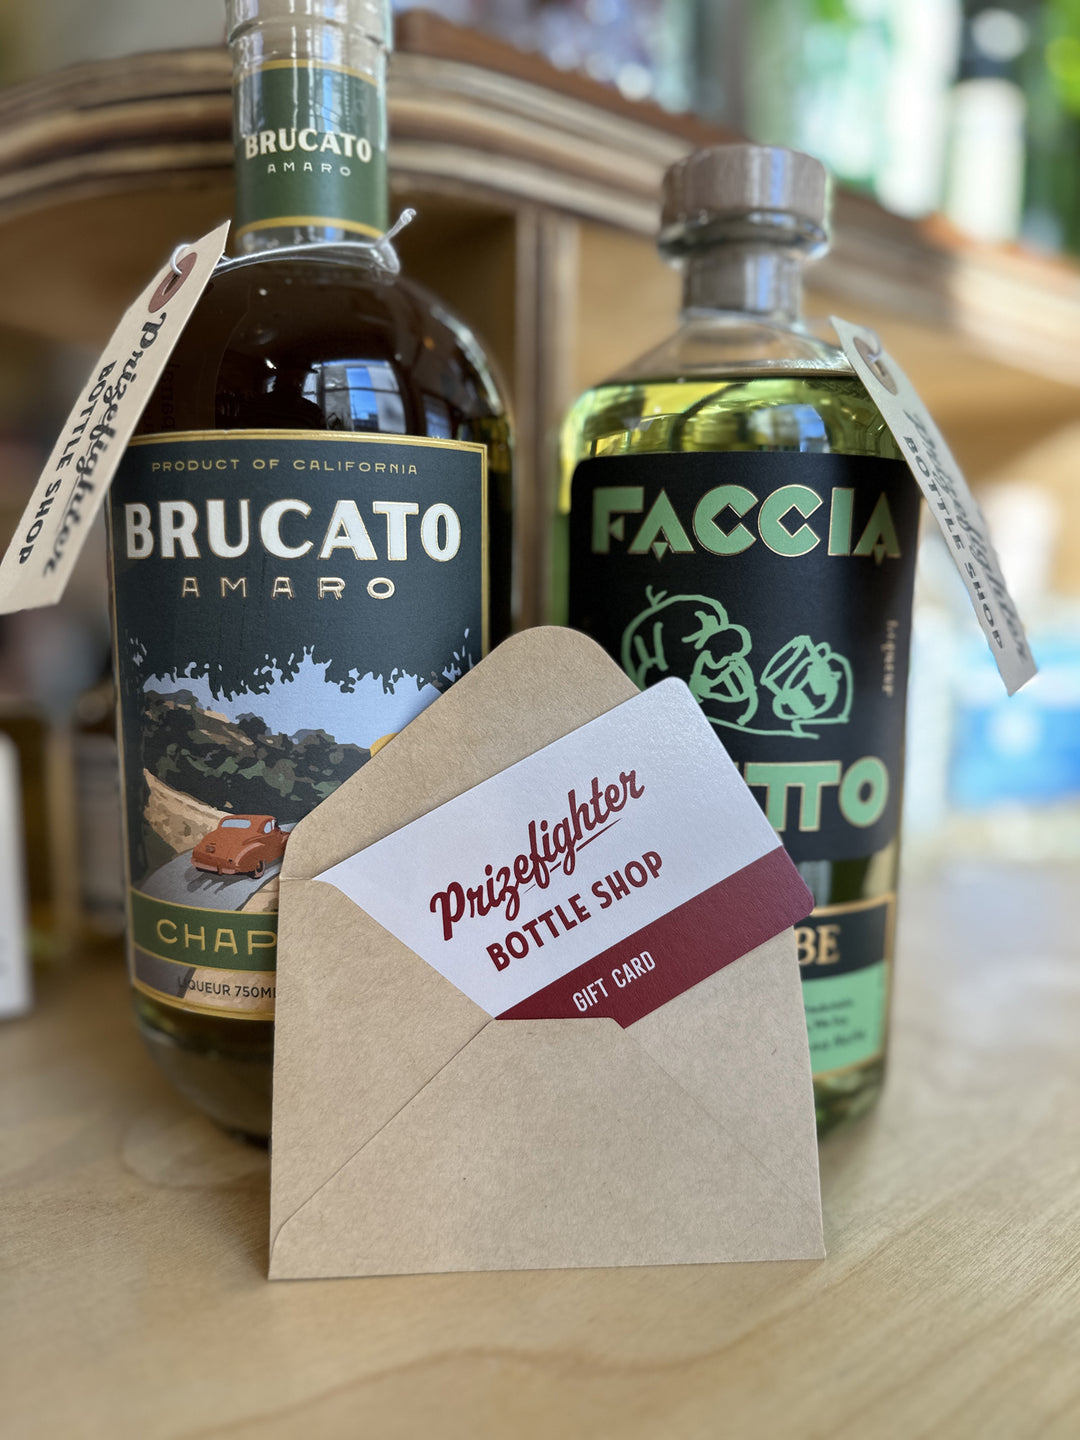 A gift card sticking out of a brown envelope in front of two different bottles of amaros